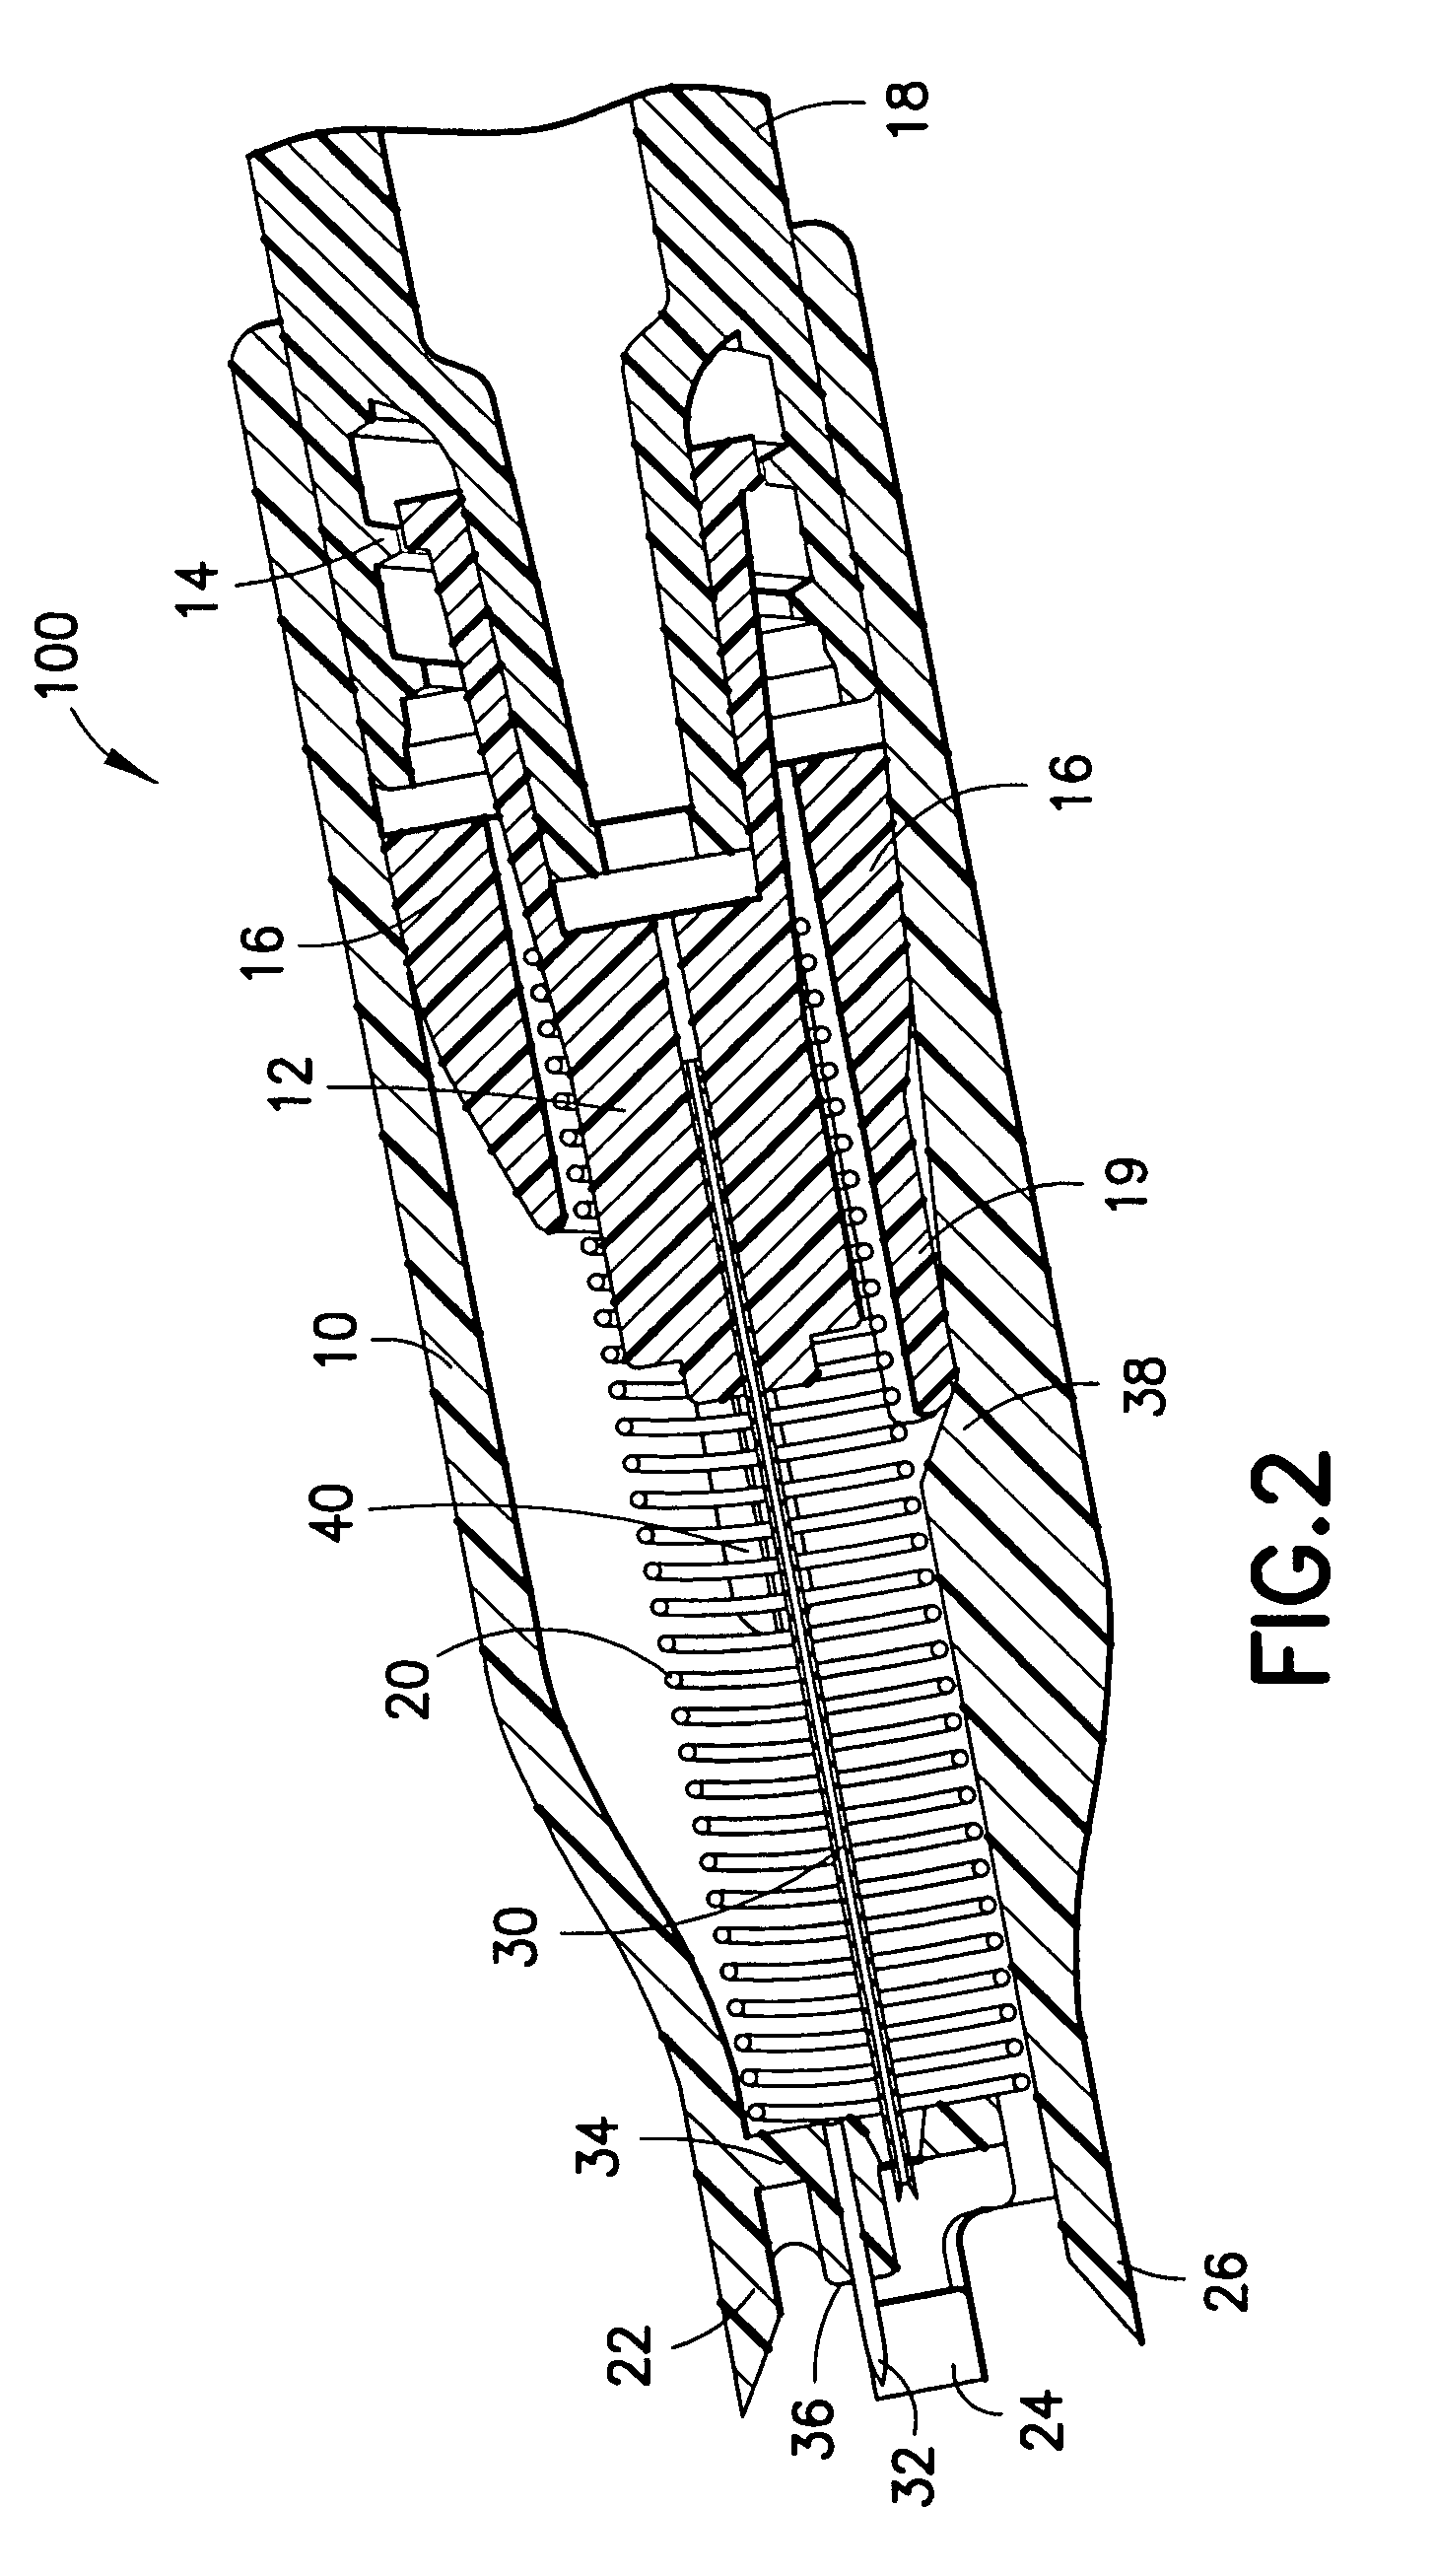 Intravitreal injection device and method